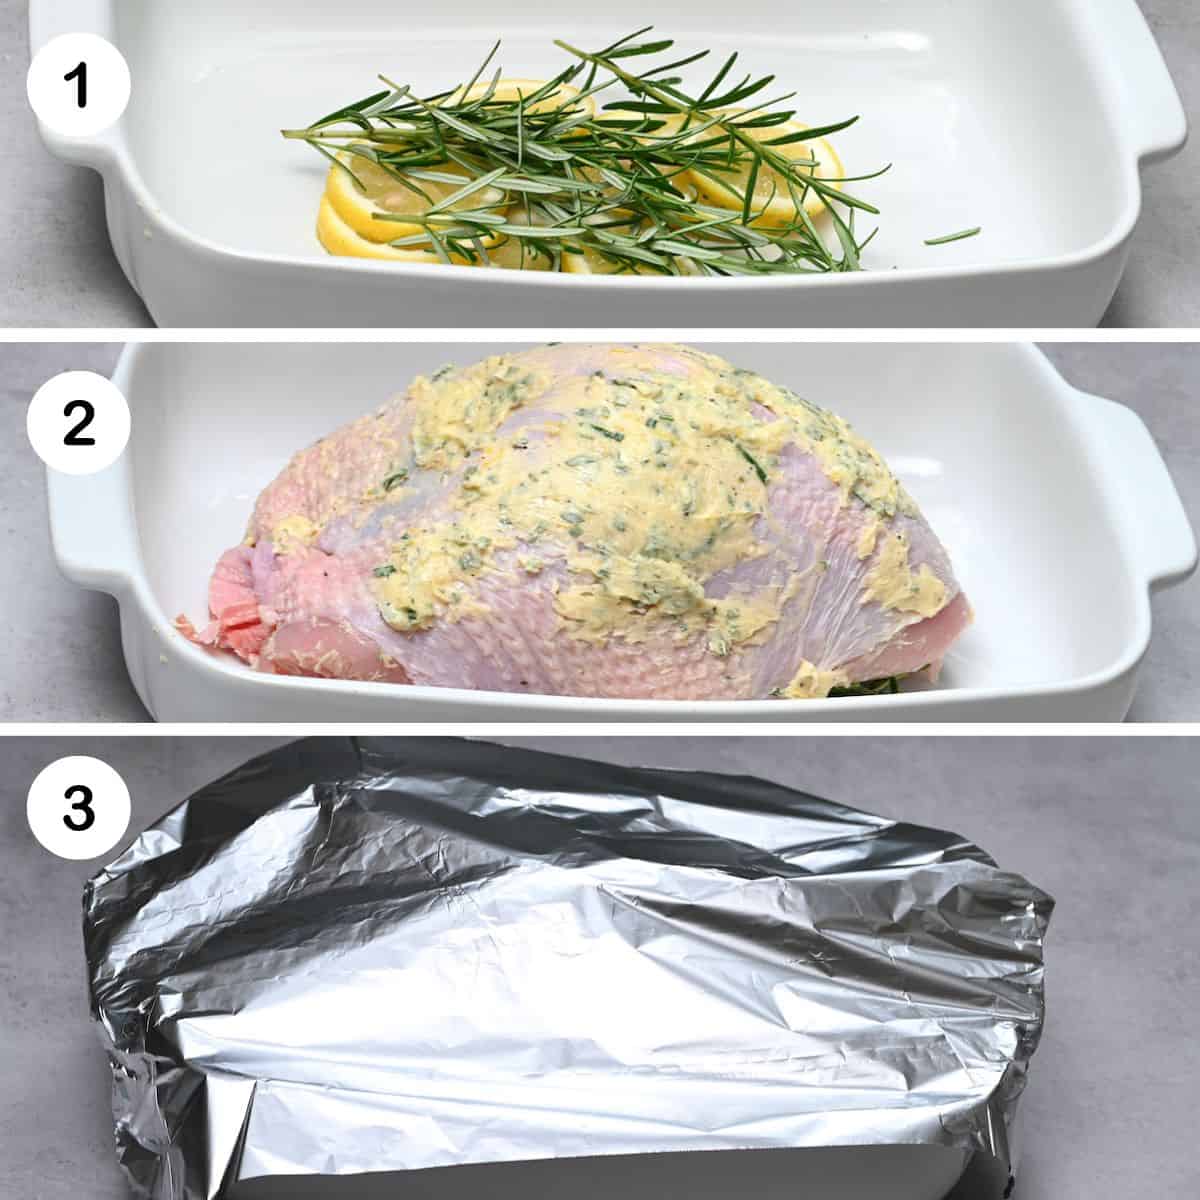 Three-step photo sequence: 1) Bed of lemon slices and rosemary leaves, 2) Buttered turkey breast, 3) Turkey breast covered loosely with aluminum foil.